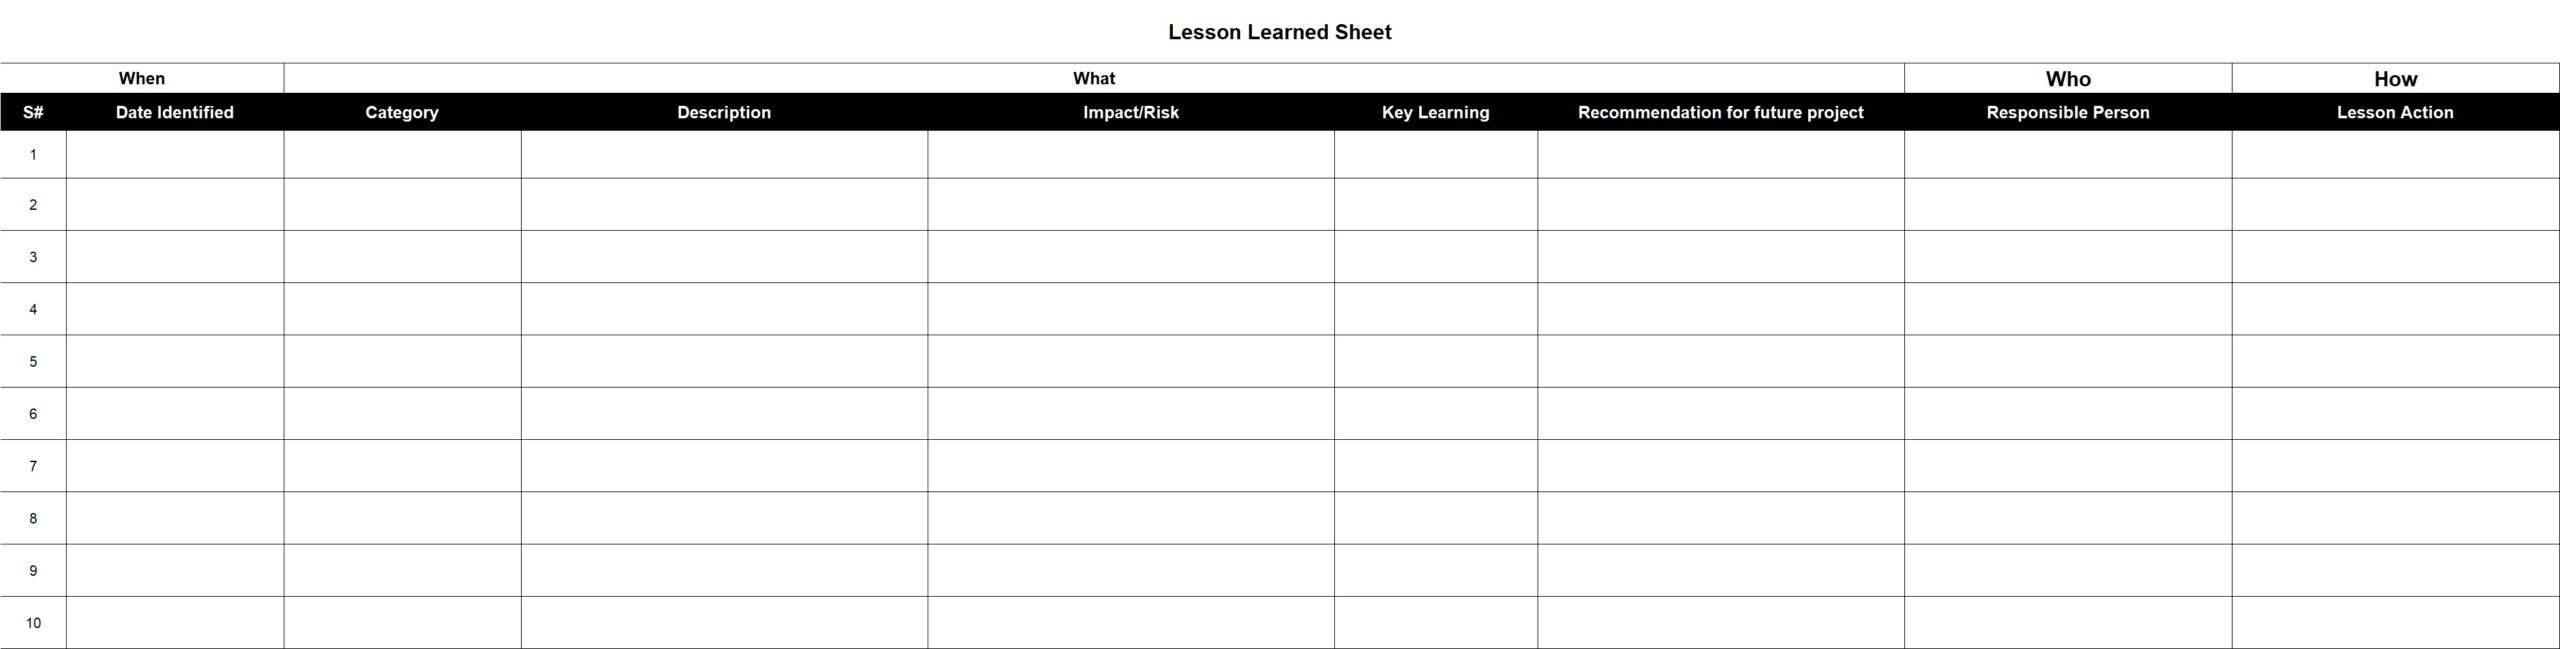 Lessons Learned Sheet